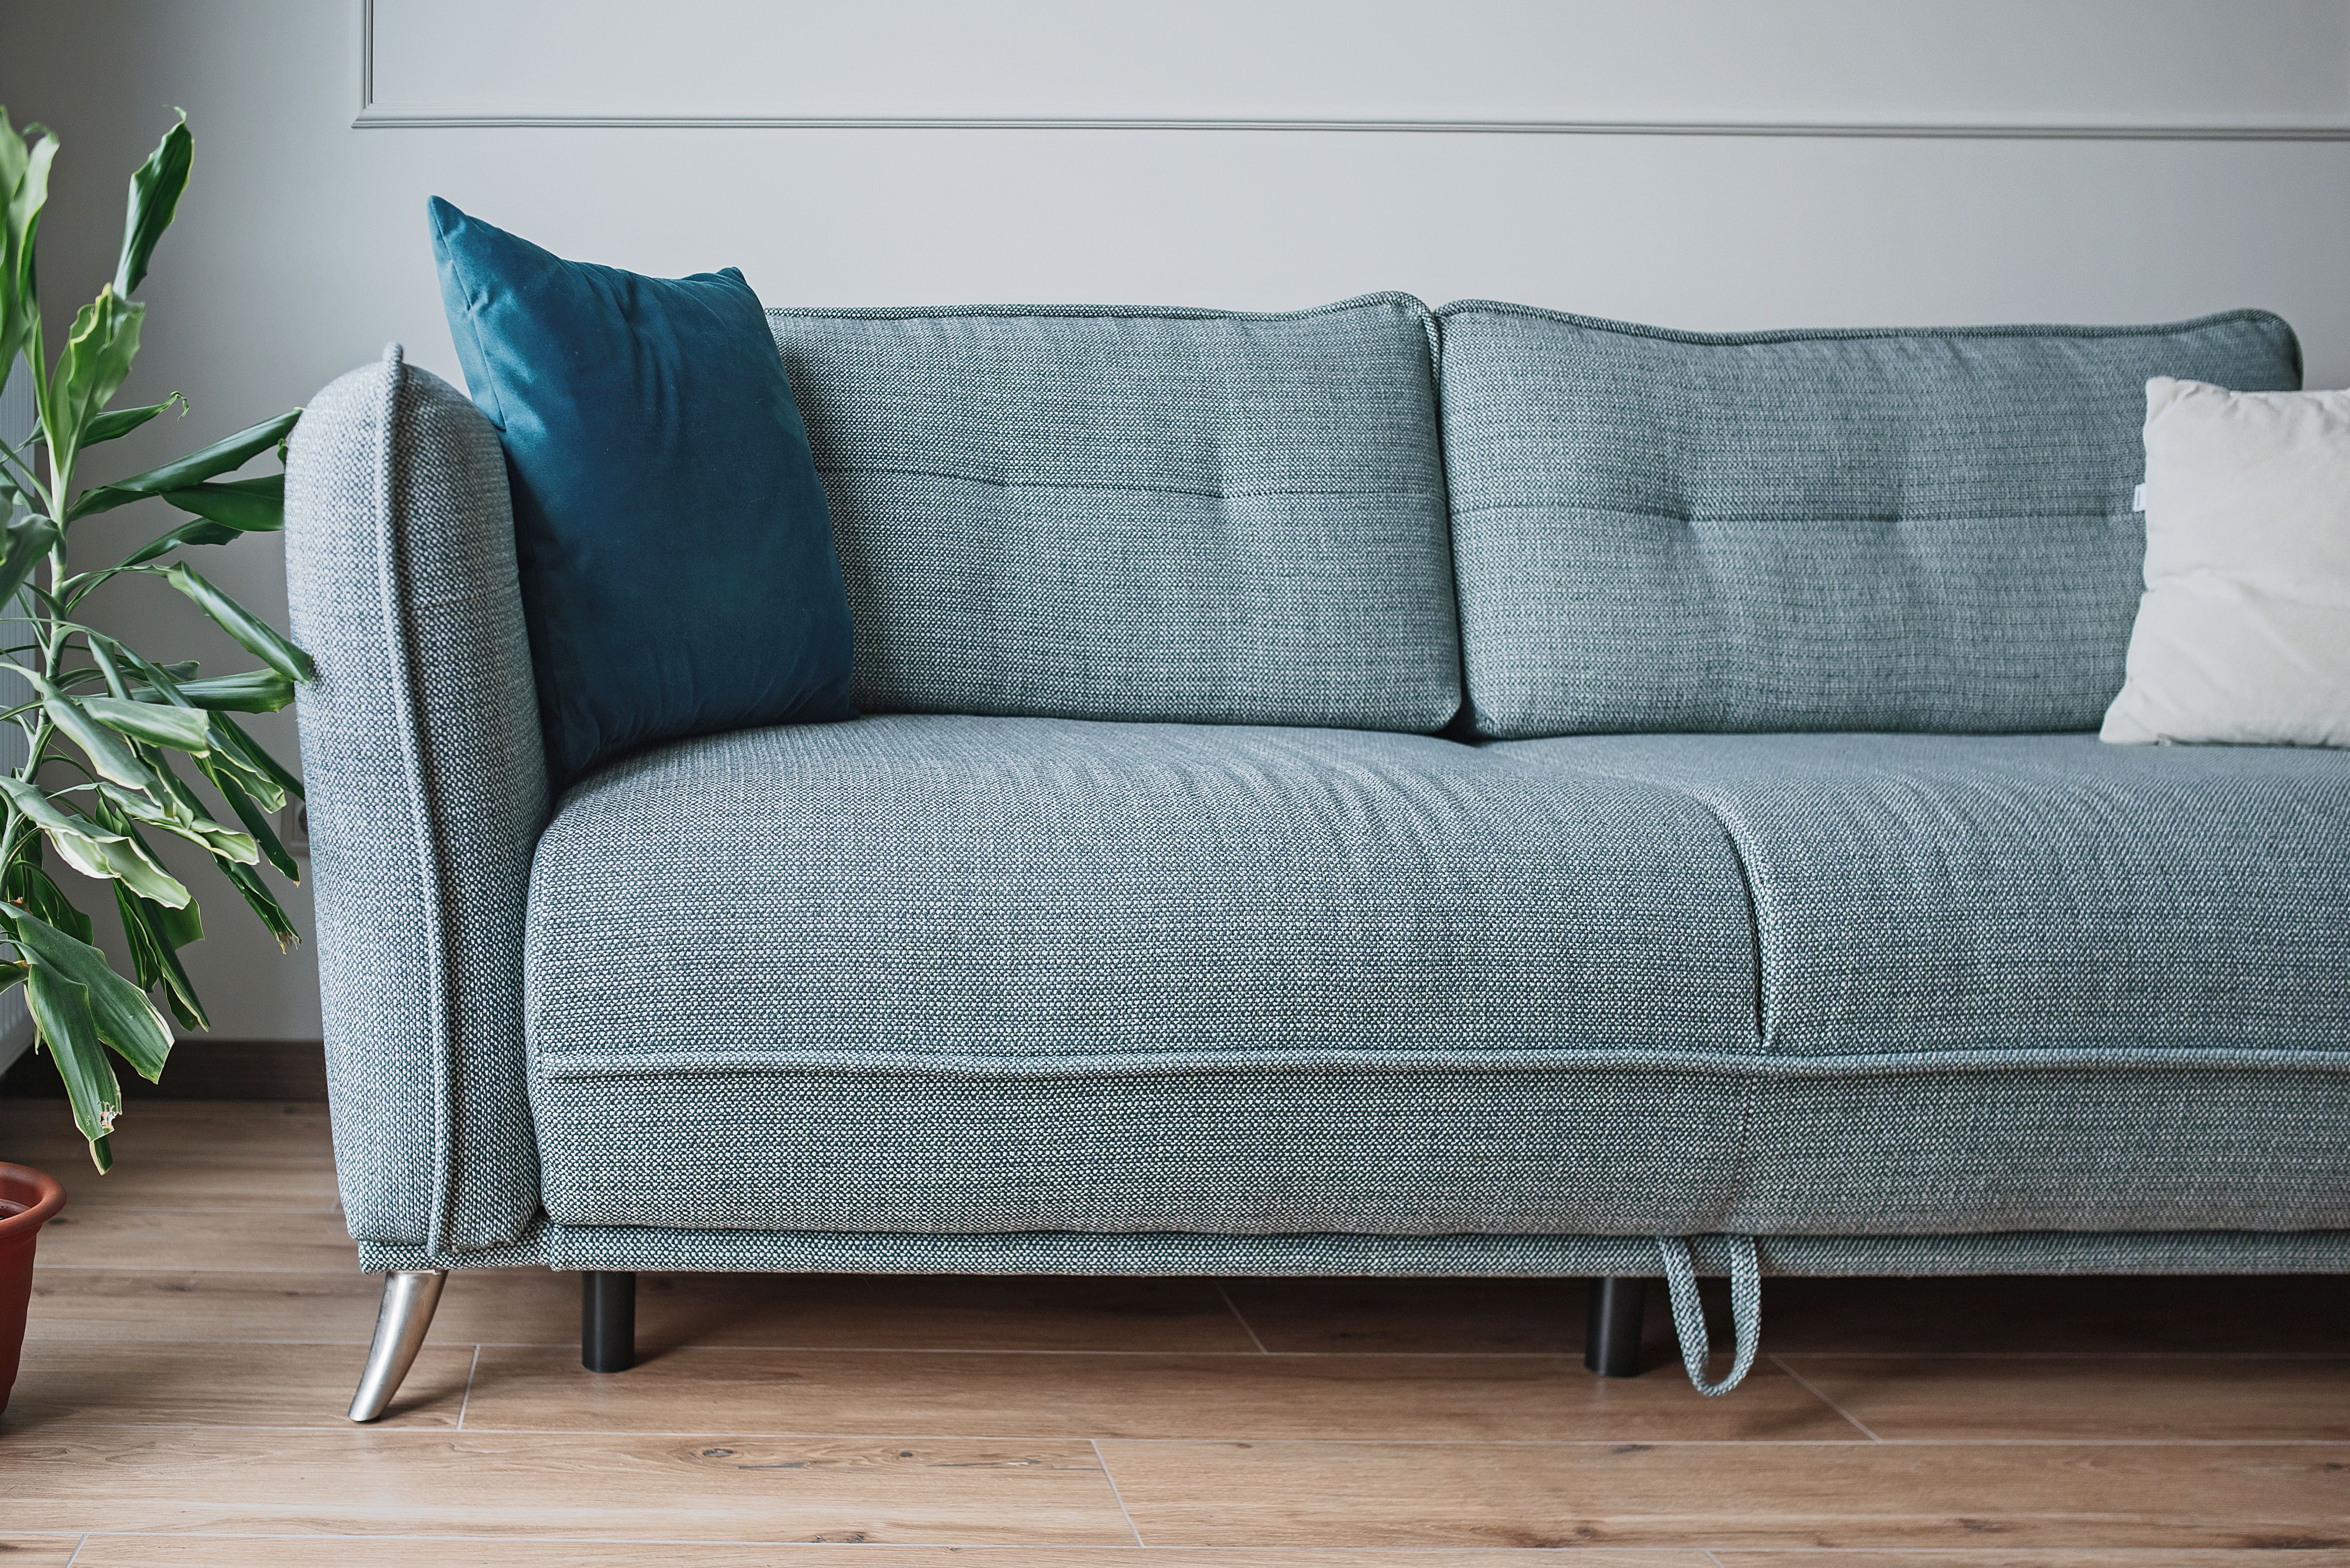 The Easiest Way to Wash Upholstery Fabric